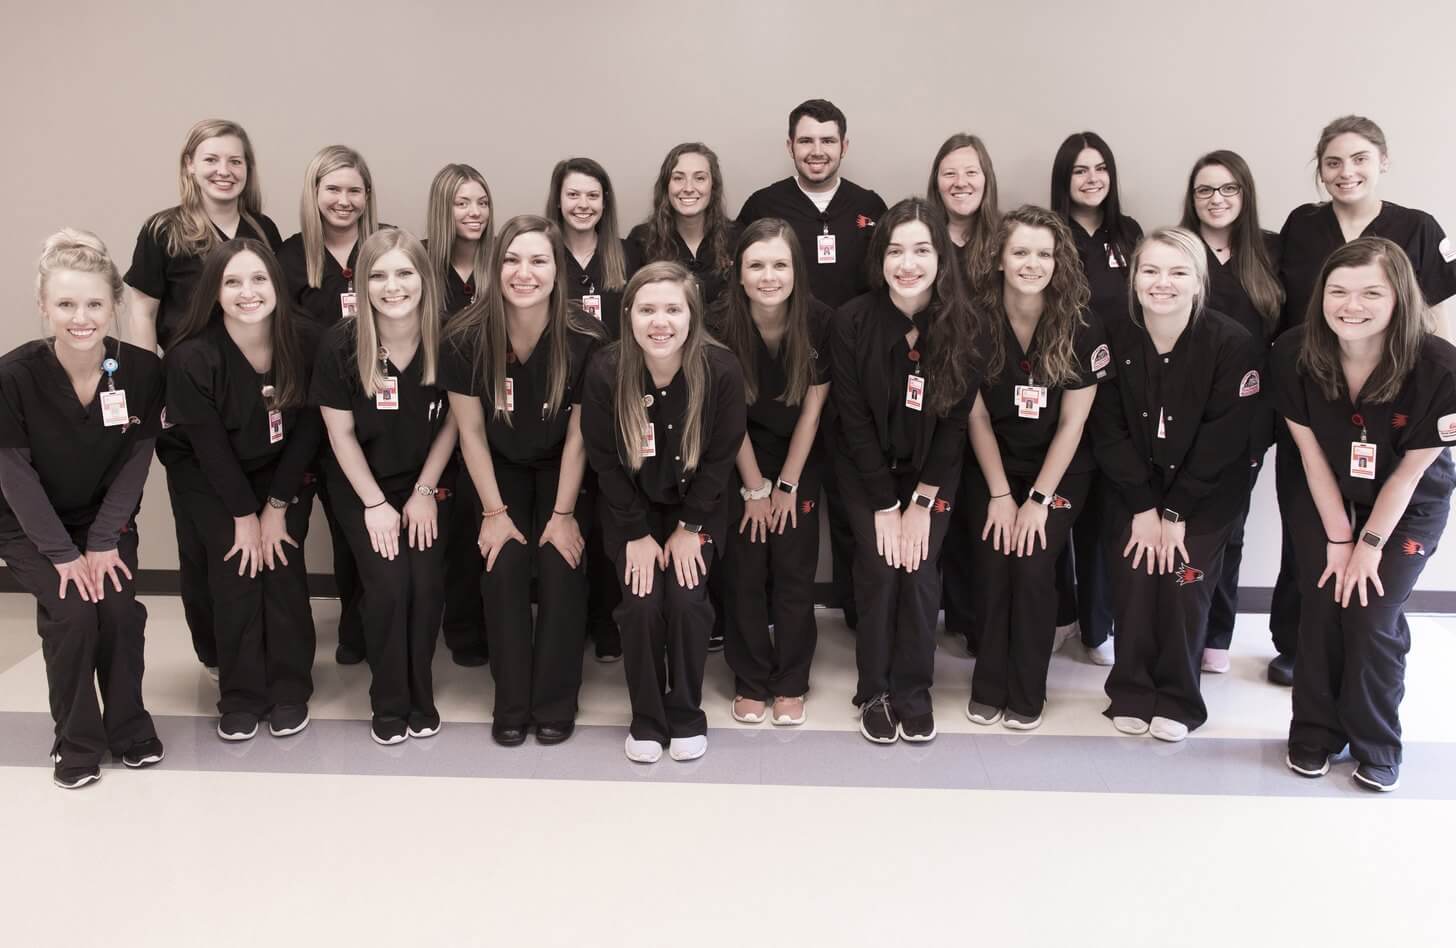 Senior nursing students in the “Introduction to Critical Care” course at Southeast Missouri State University spent the spring semester piloting a first-of-its-kind online program on tissue and organ donation.